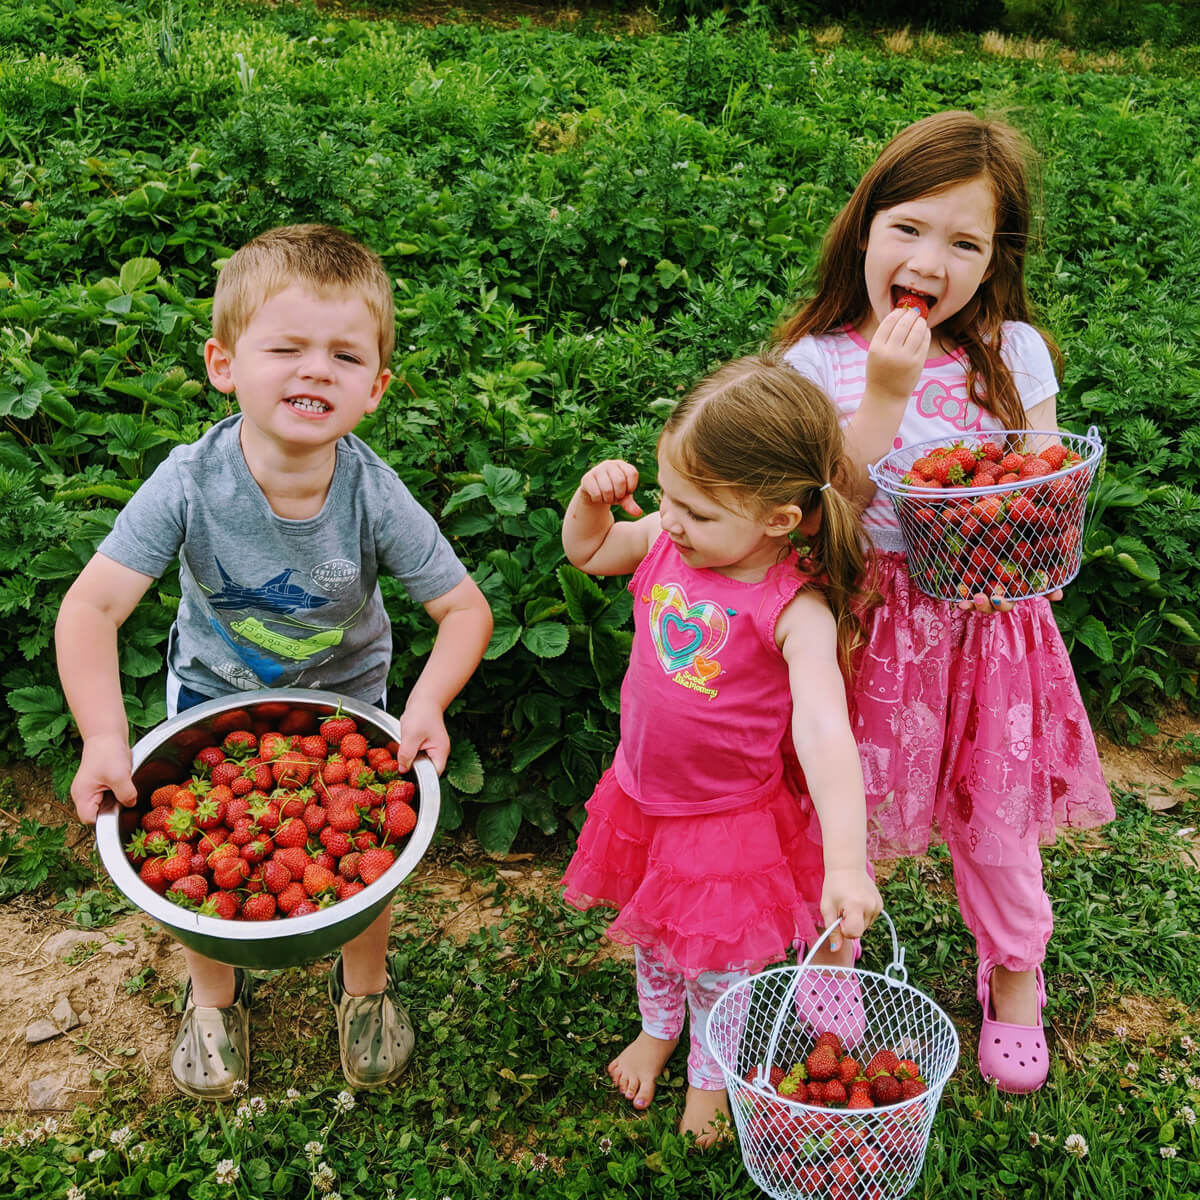 Picking Strawberries - Make Future Plans in Honor of National Strawberry Day